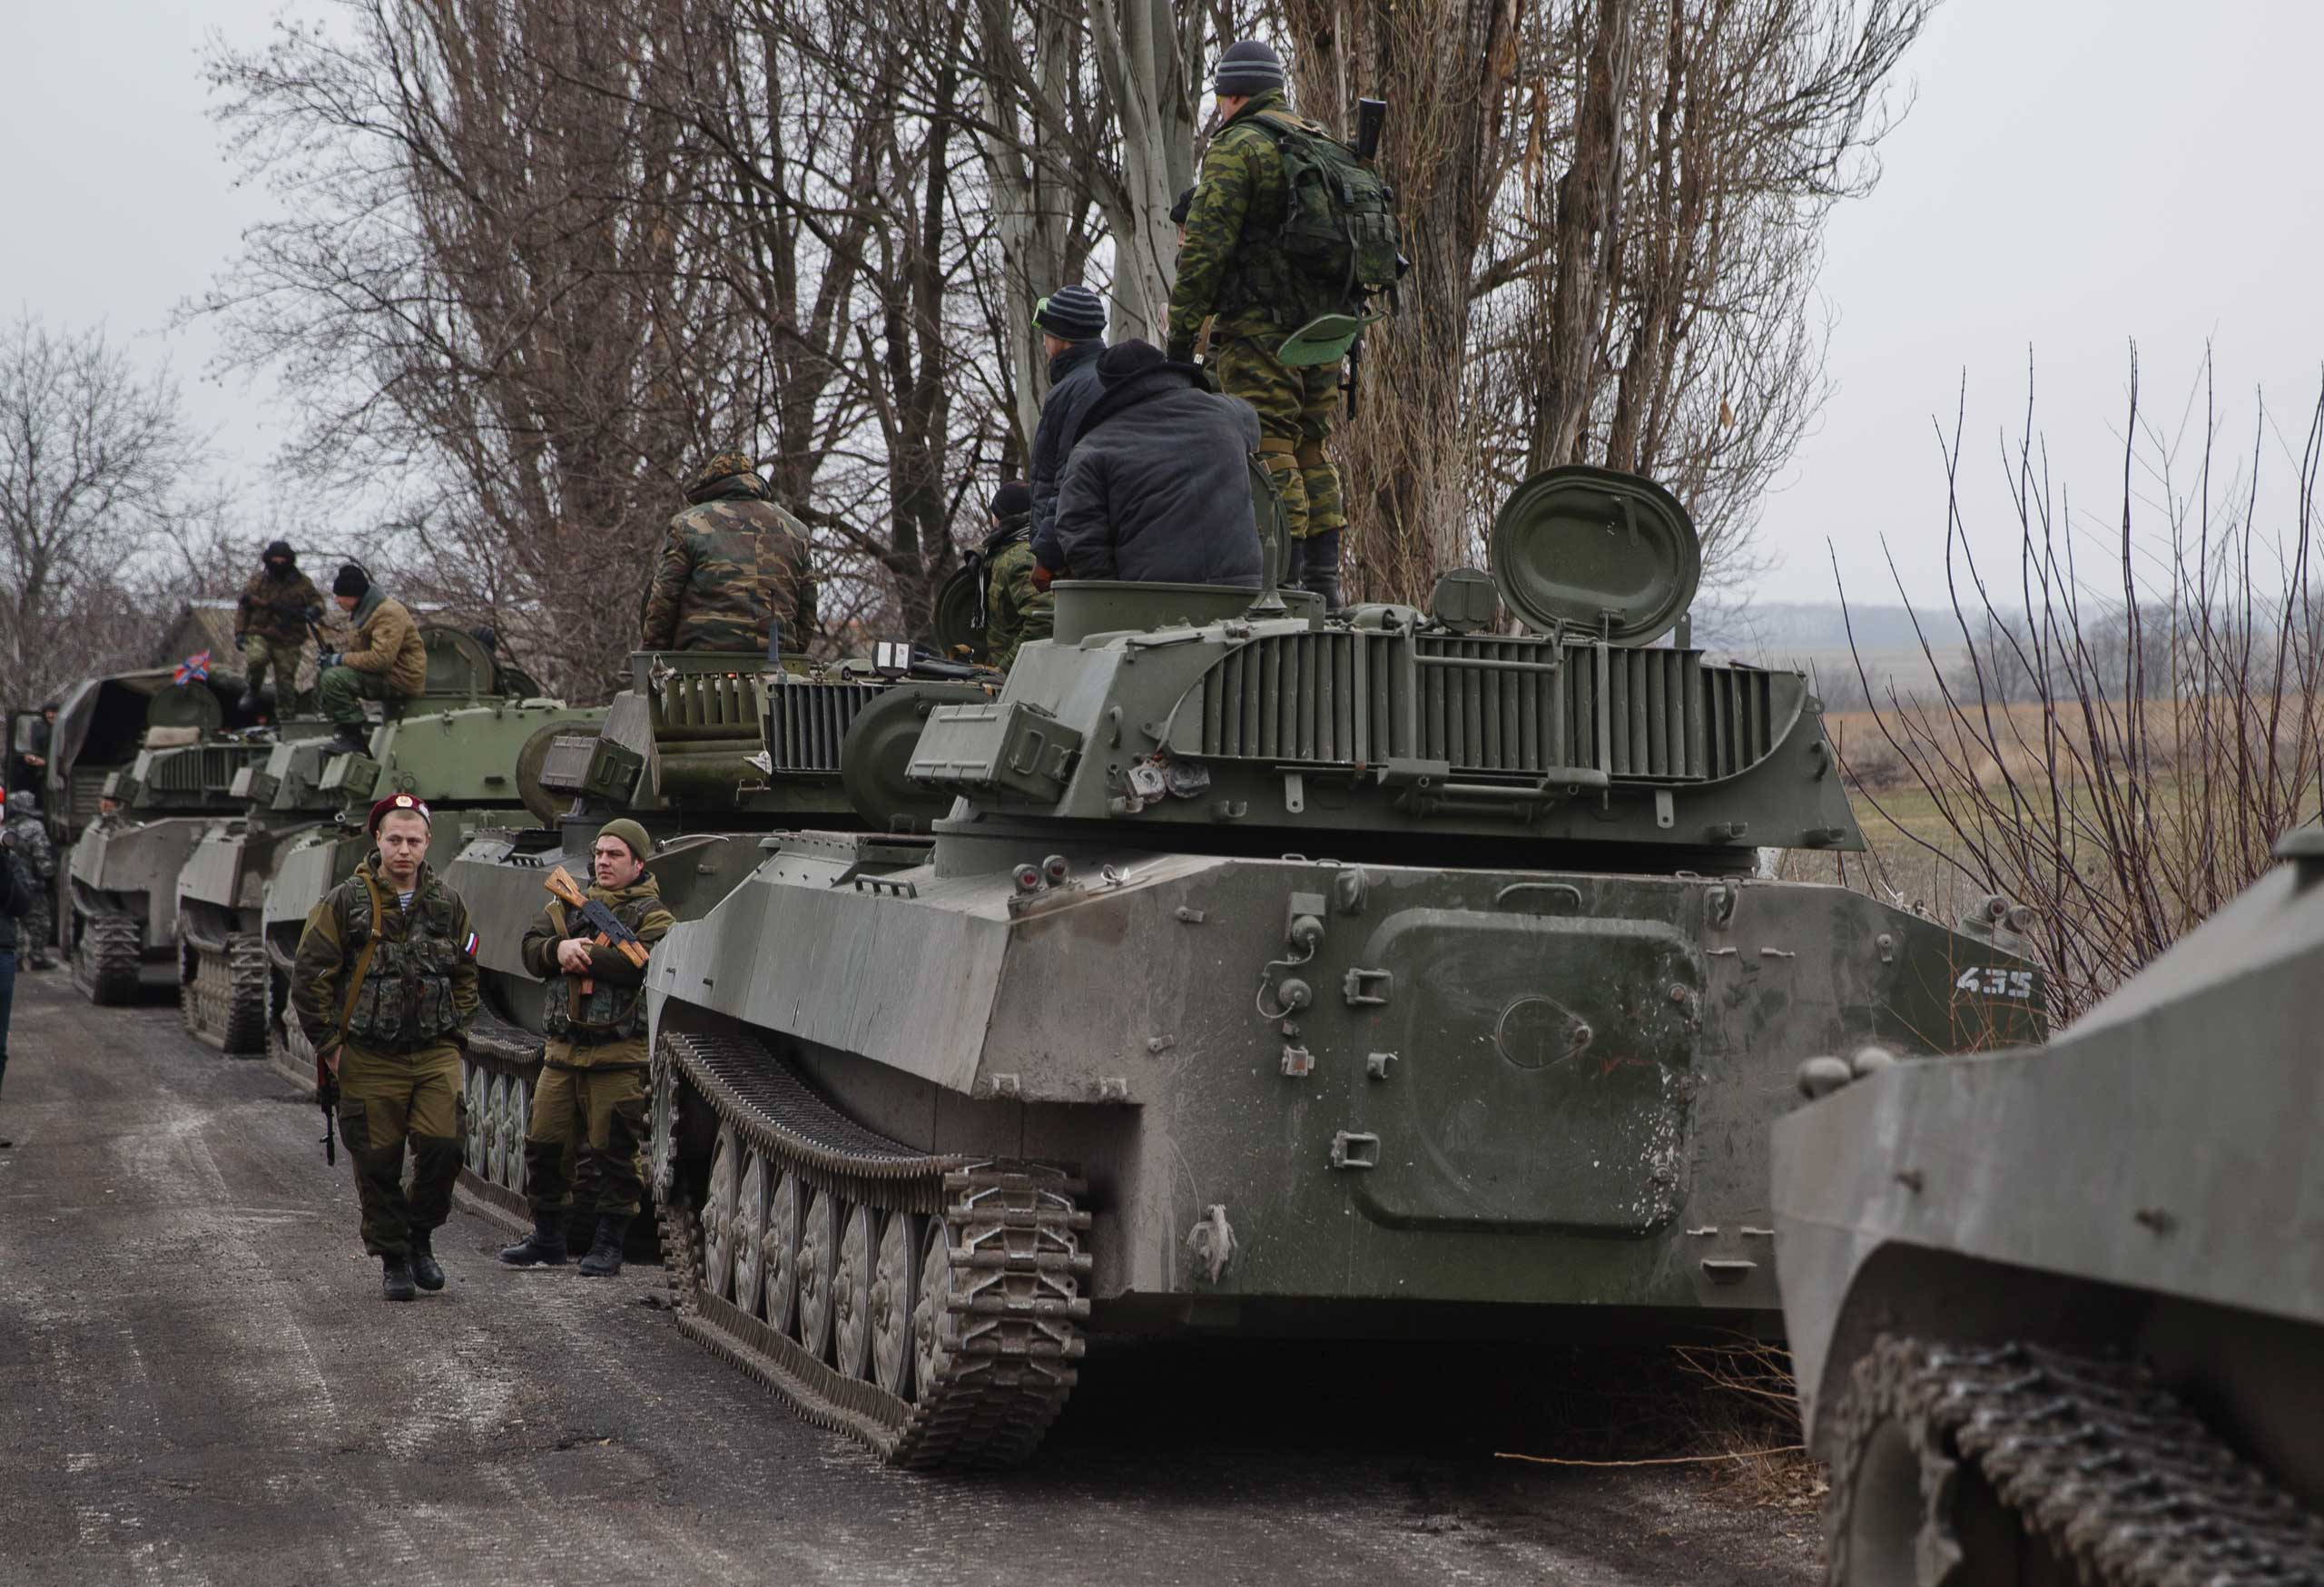 Russia-backed separatist fighters stand next to self propelled 152 mm artillery pieces, part of a unit moved away from the front lines, in Yelenovka, near Donetsk, Ukraine, Feb. 26, 2015. (Vadim Ghirda—AP)